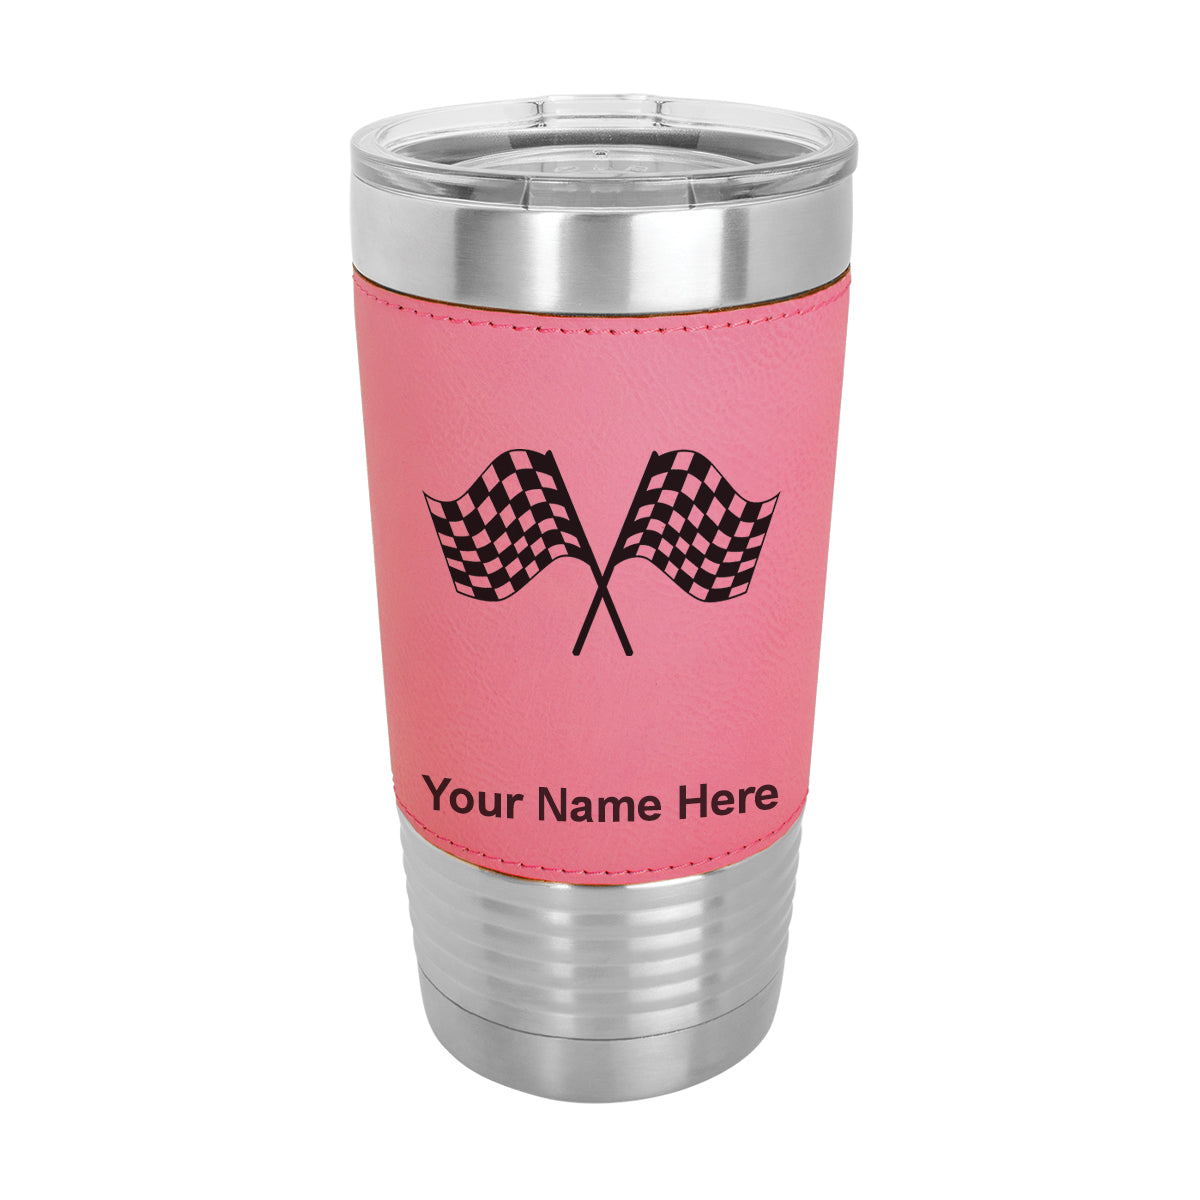 20oz Faux Leather Tumbler Mug, Racing Flags, Personalized Engraving Included - LaserGram Custom Engraved Gifts